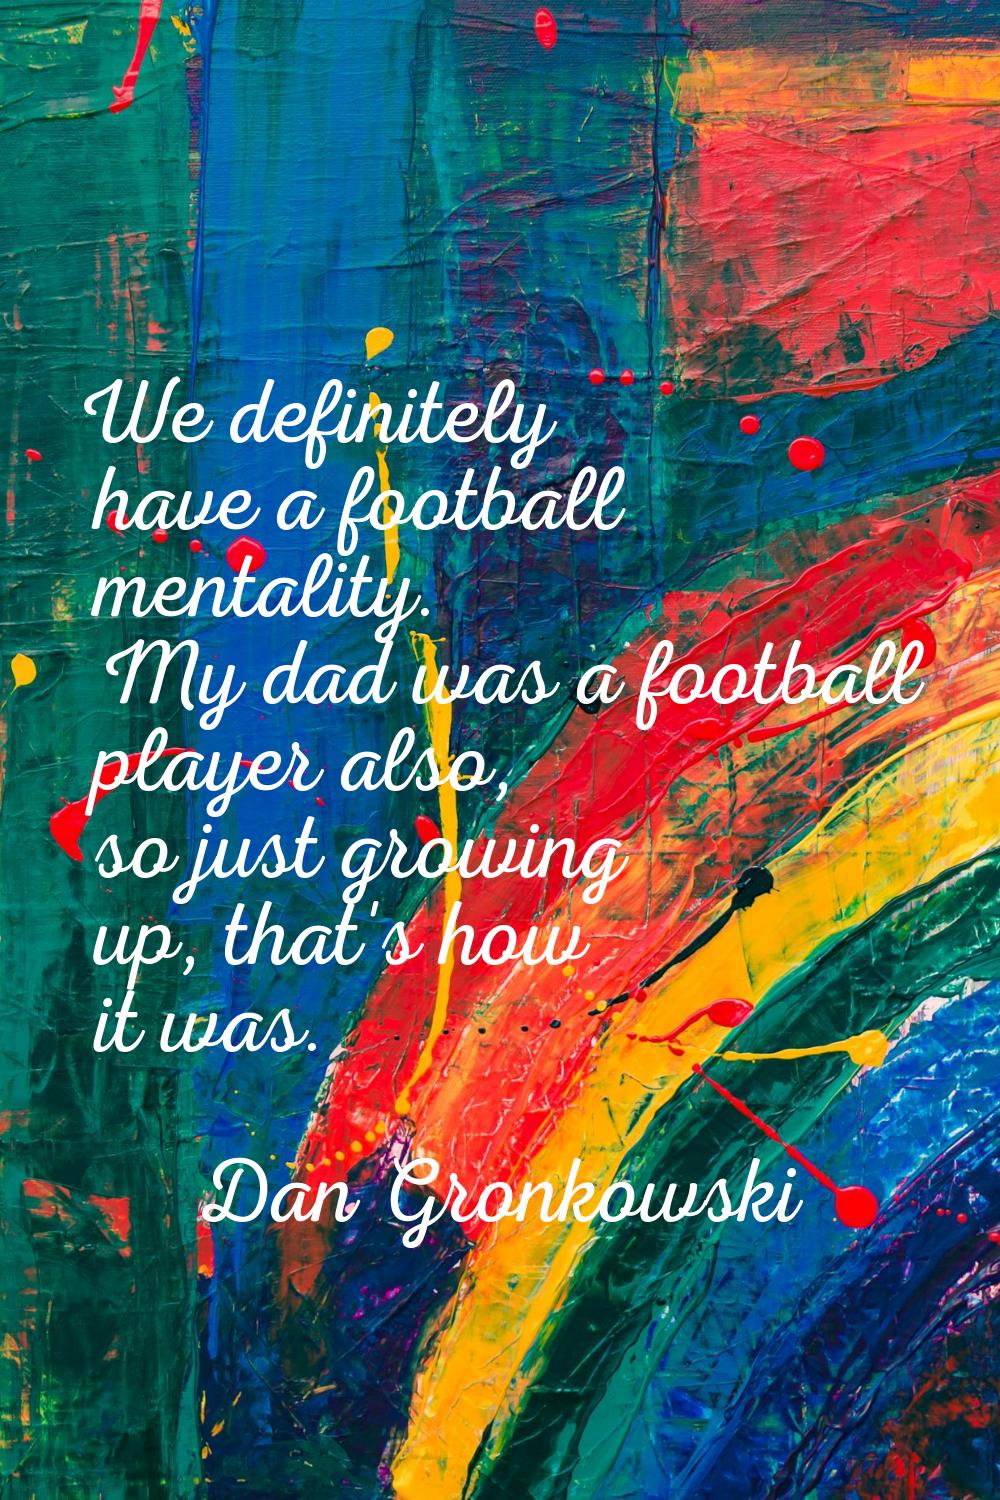 We definitely have a football mentality. My dad was a football player also, so just growing up, tha